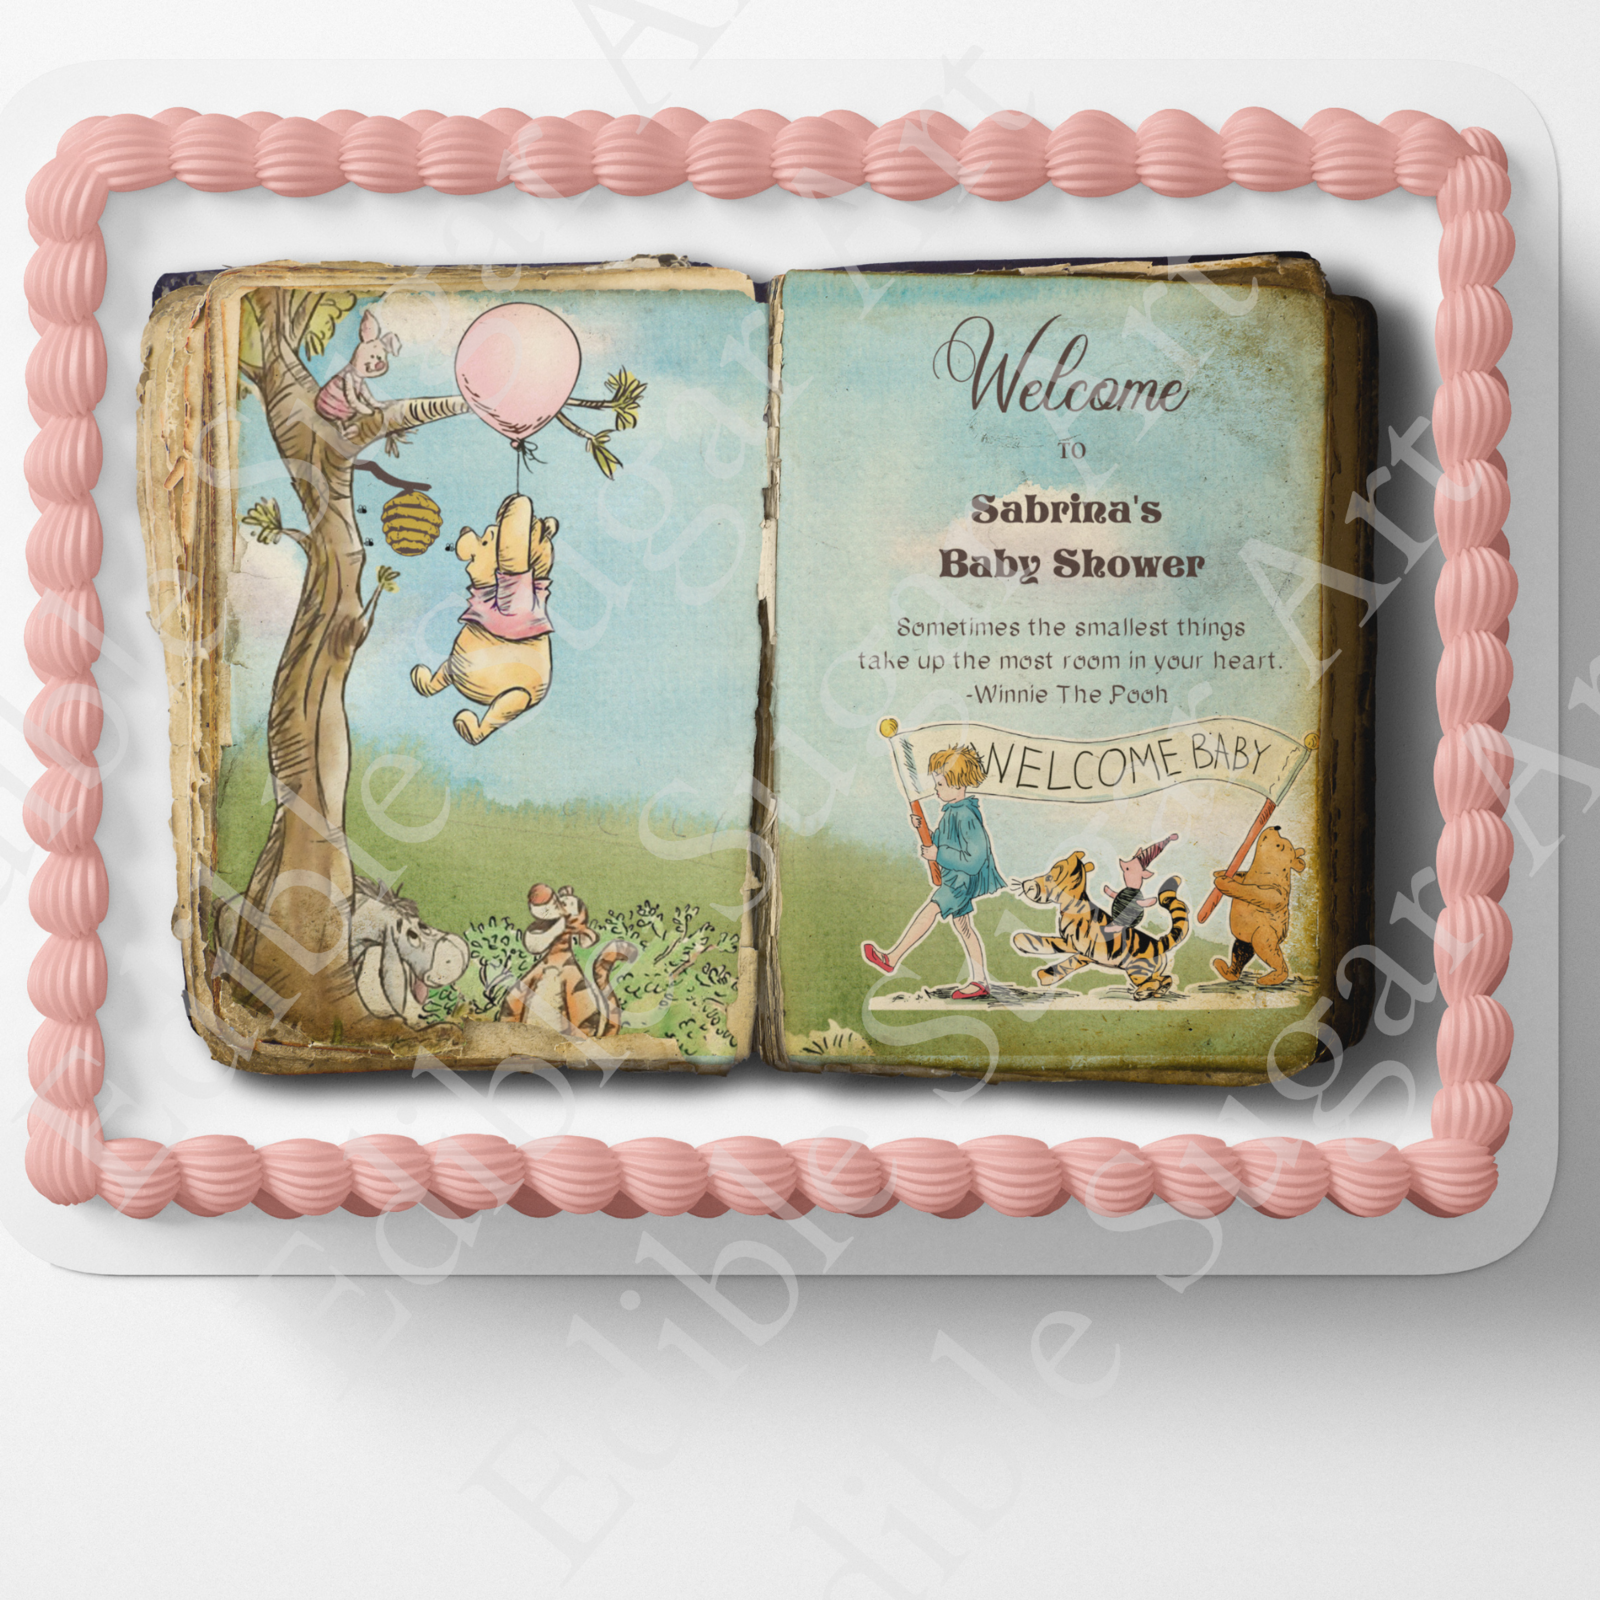 Primary image for POOH BEAR BABY Shower Cake Topper Edible Image pooh bear book Nursery decoration